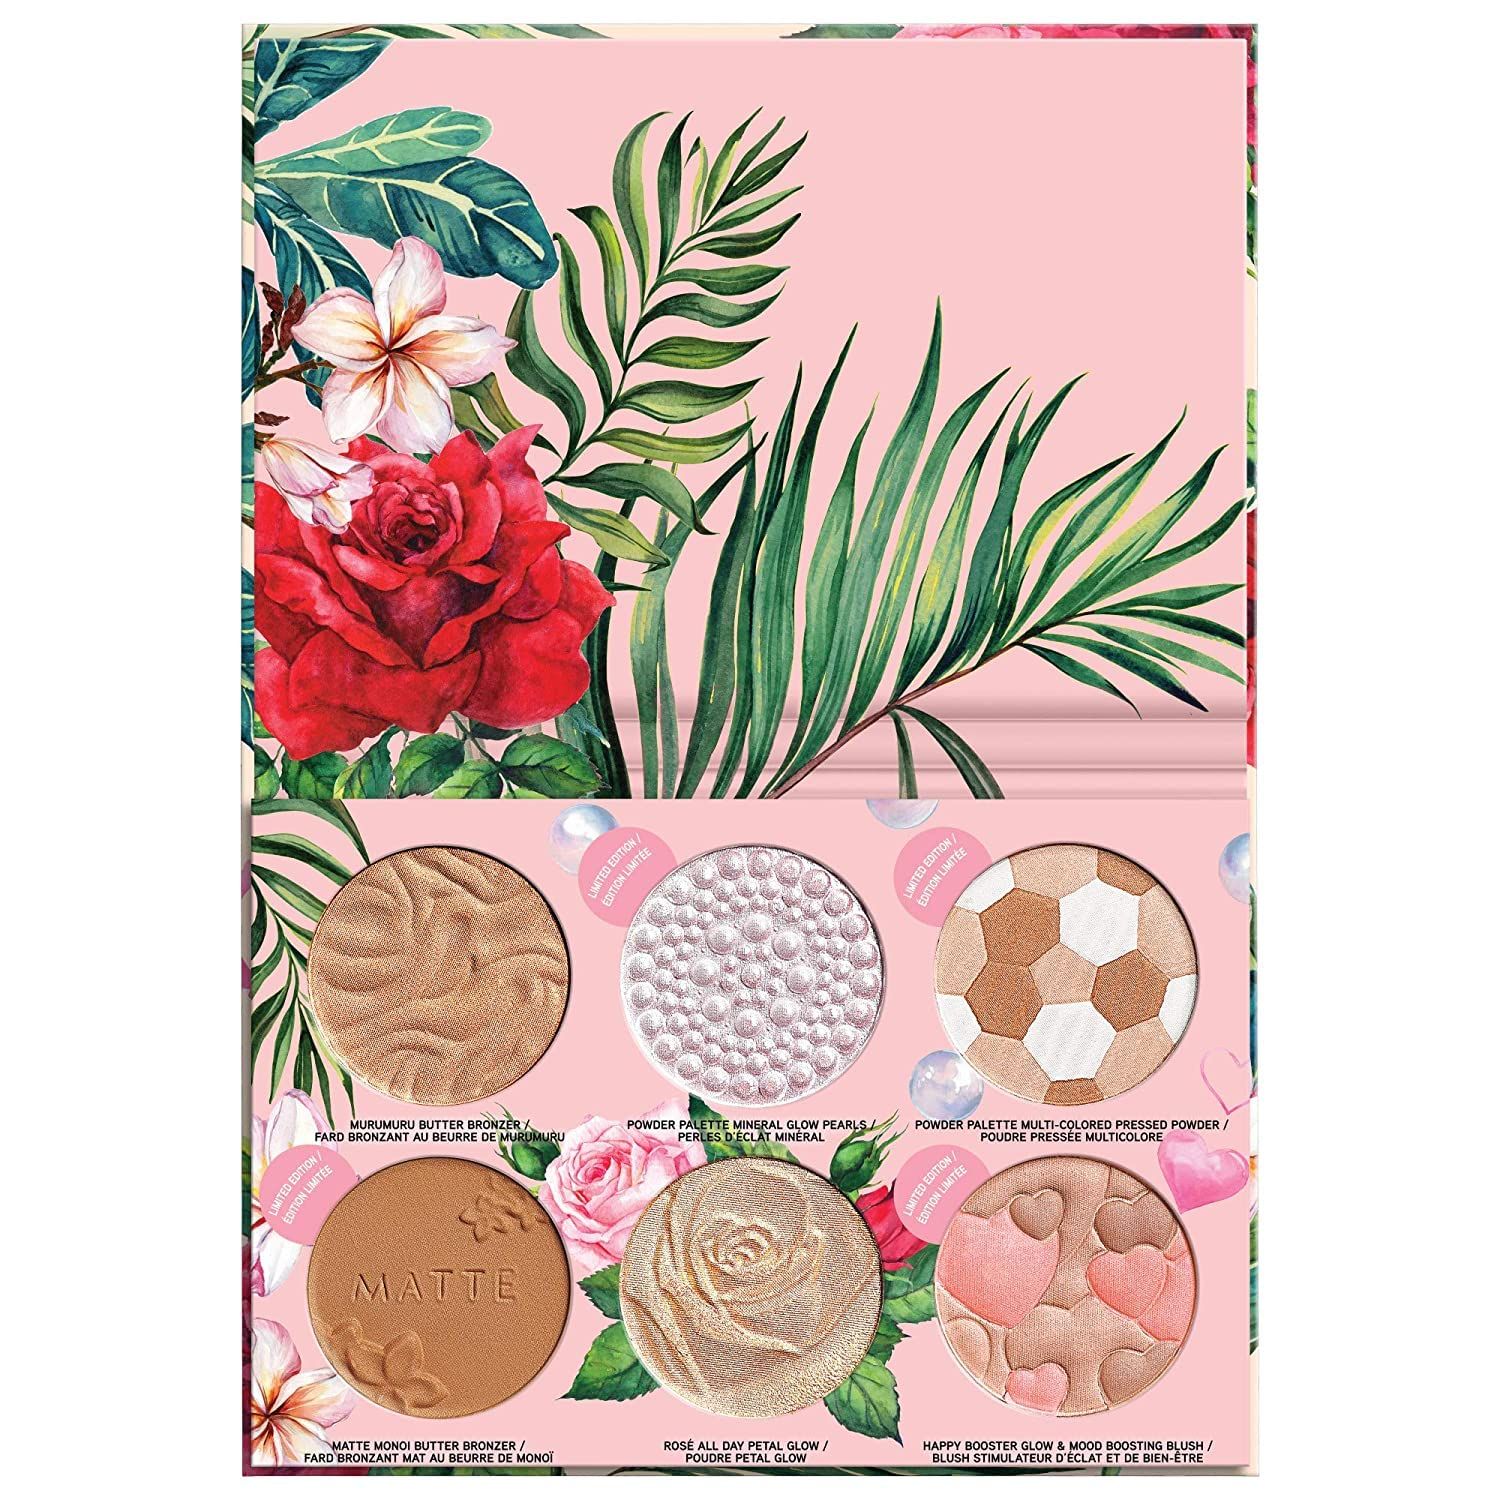 Physicians Formula All-Star Face Palette Holiday Gift Set For Women Bronzer, Blush, Powder Makeup... | Amazon (US)